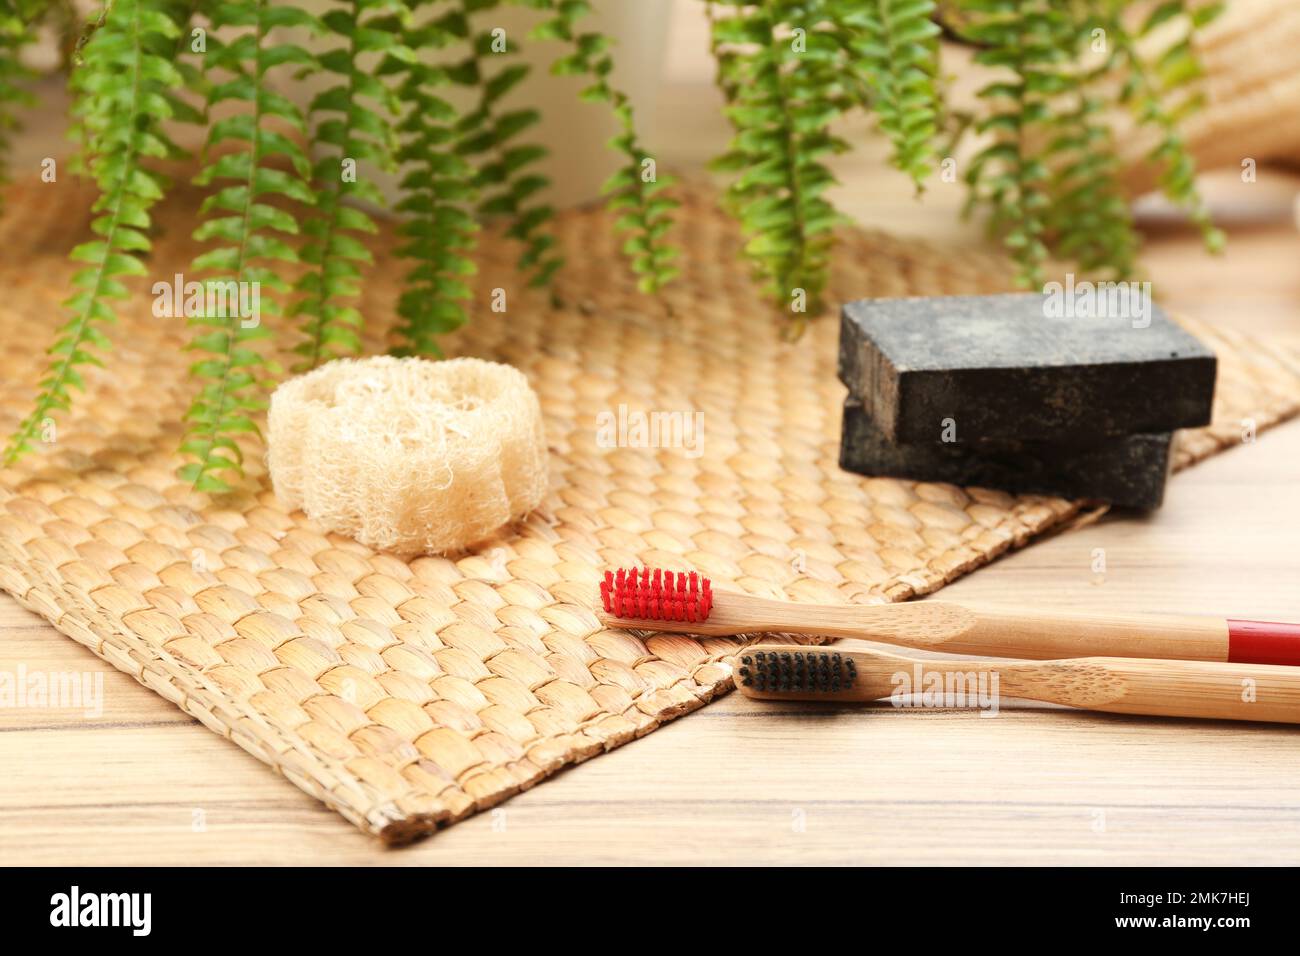 Natural toothbrushes made with bamboo on wooden table Stock Photo